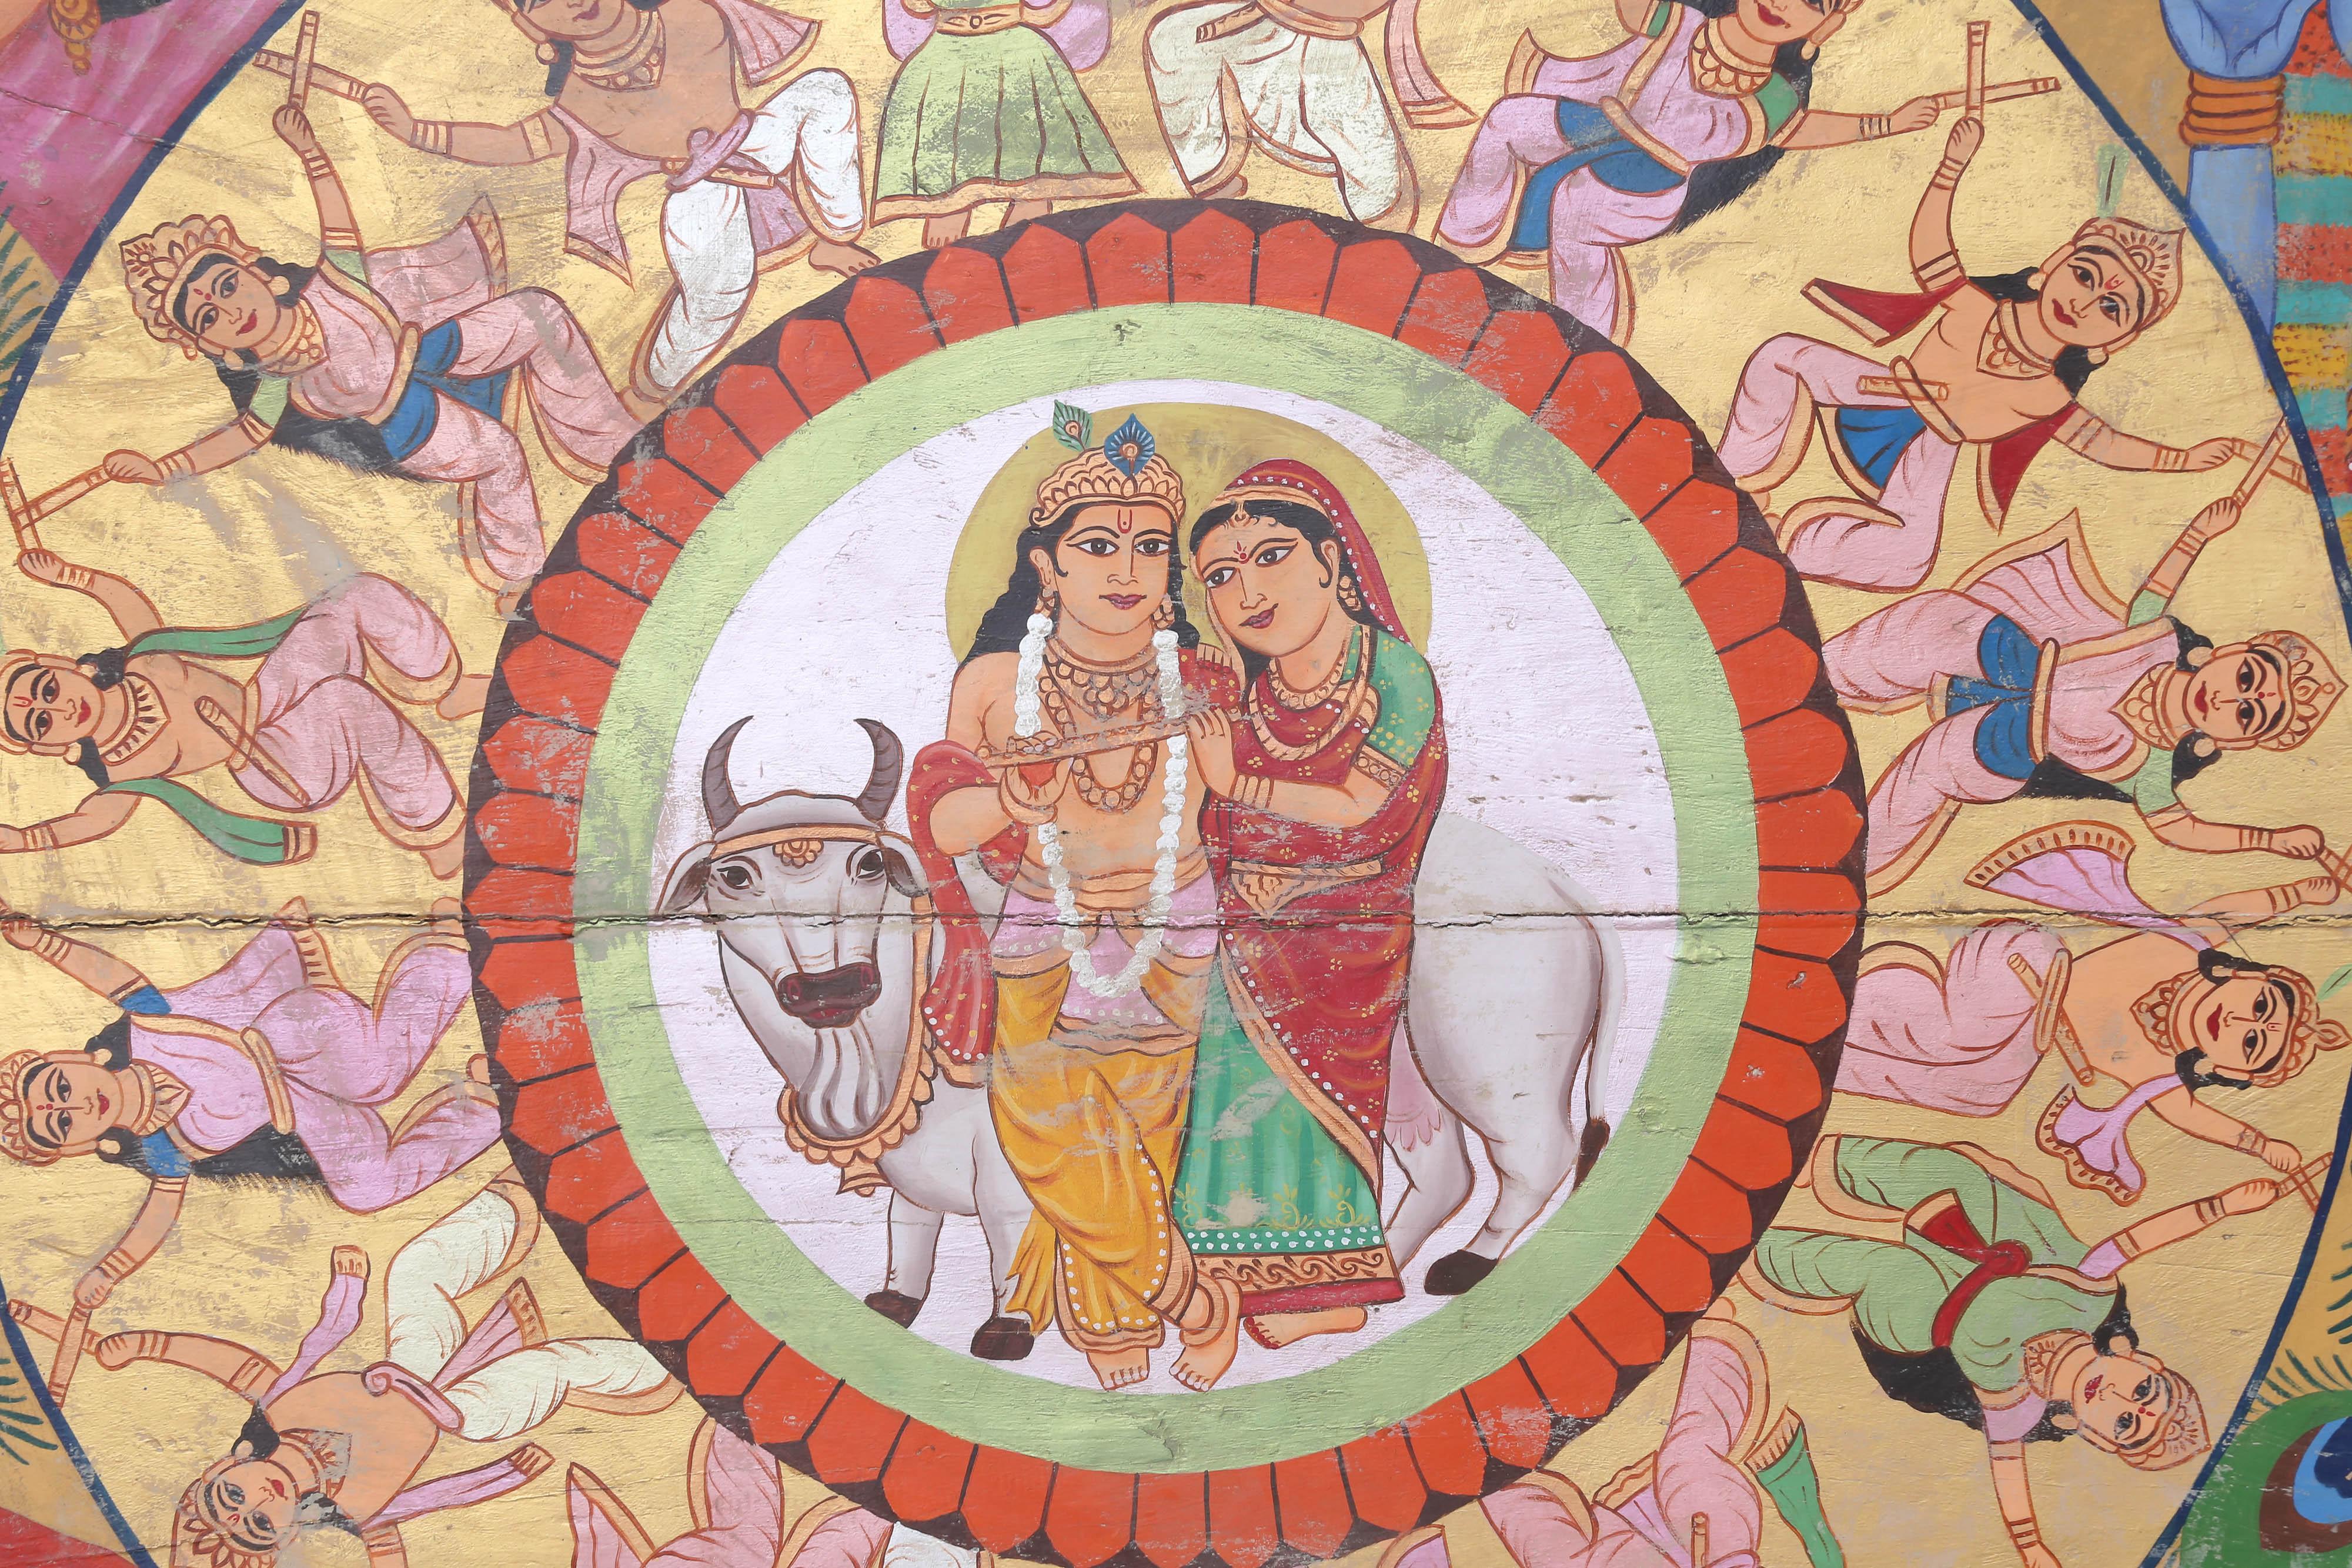 A very rare immaculate temple painting. This is a painting of Krishna with his gopi girlfriends. The gopis love Krishna the most. This is pure selfless love. They only want to make Krishna happy, but the paradox is that the more they try to please